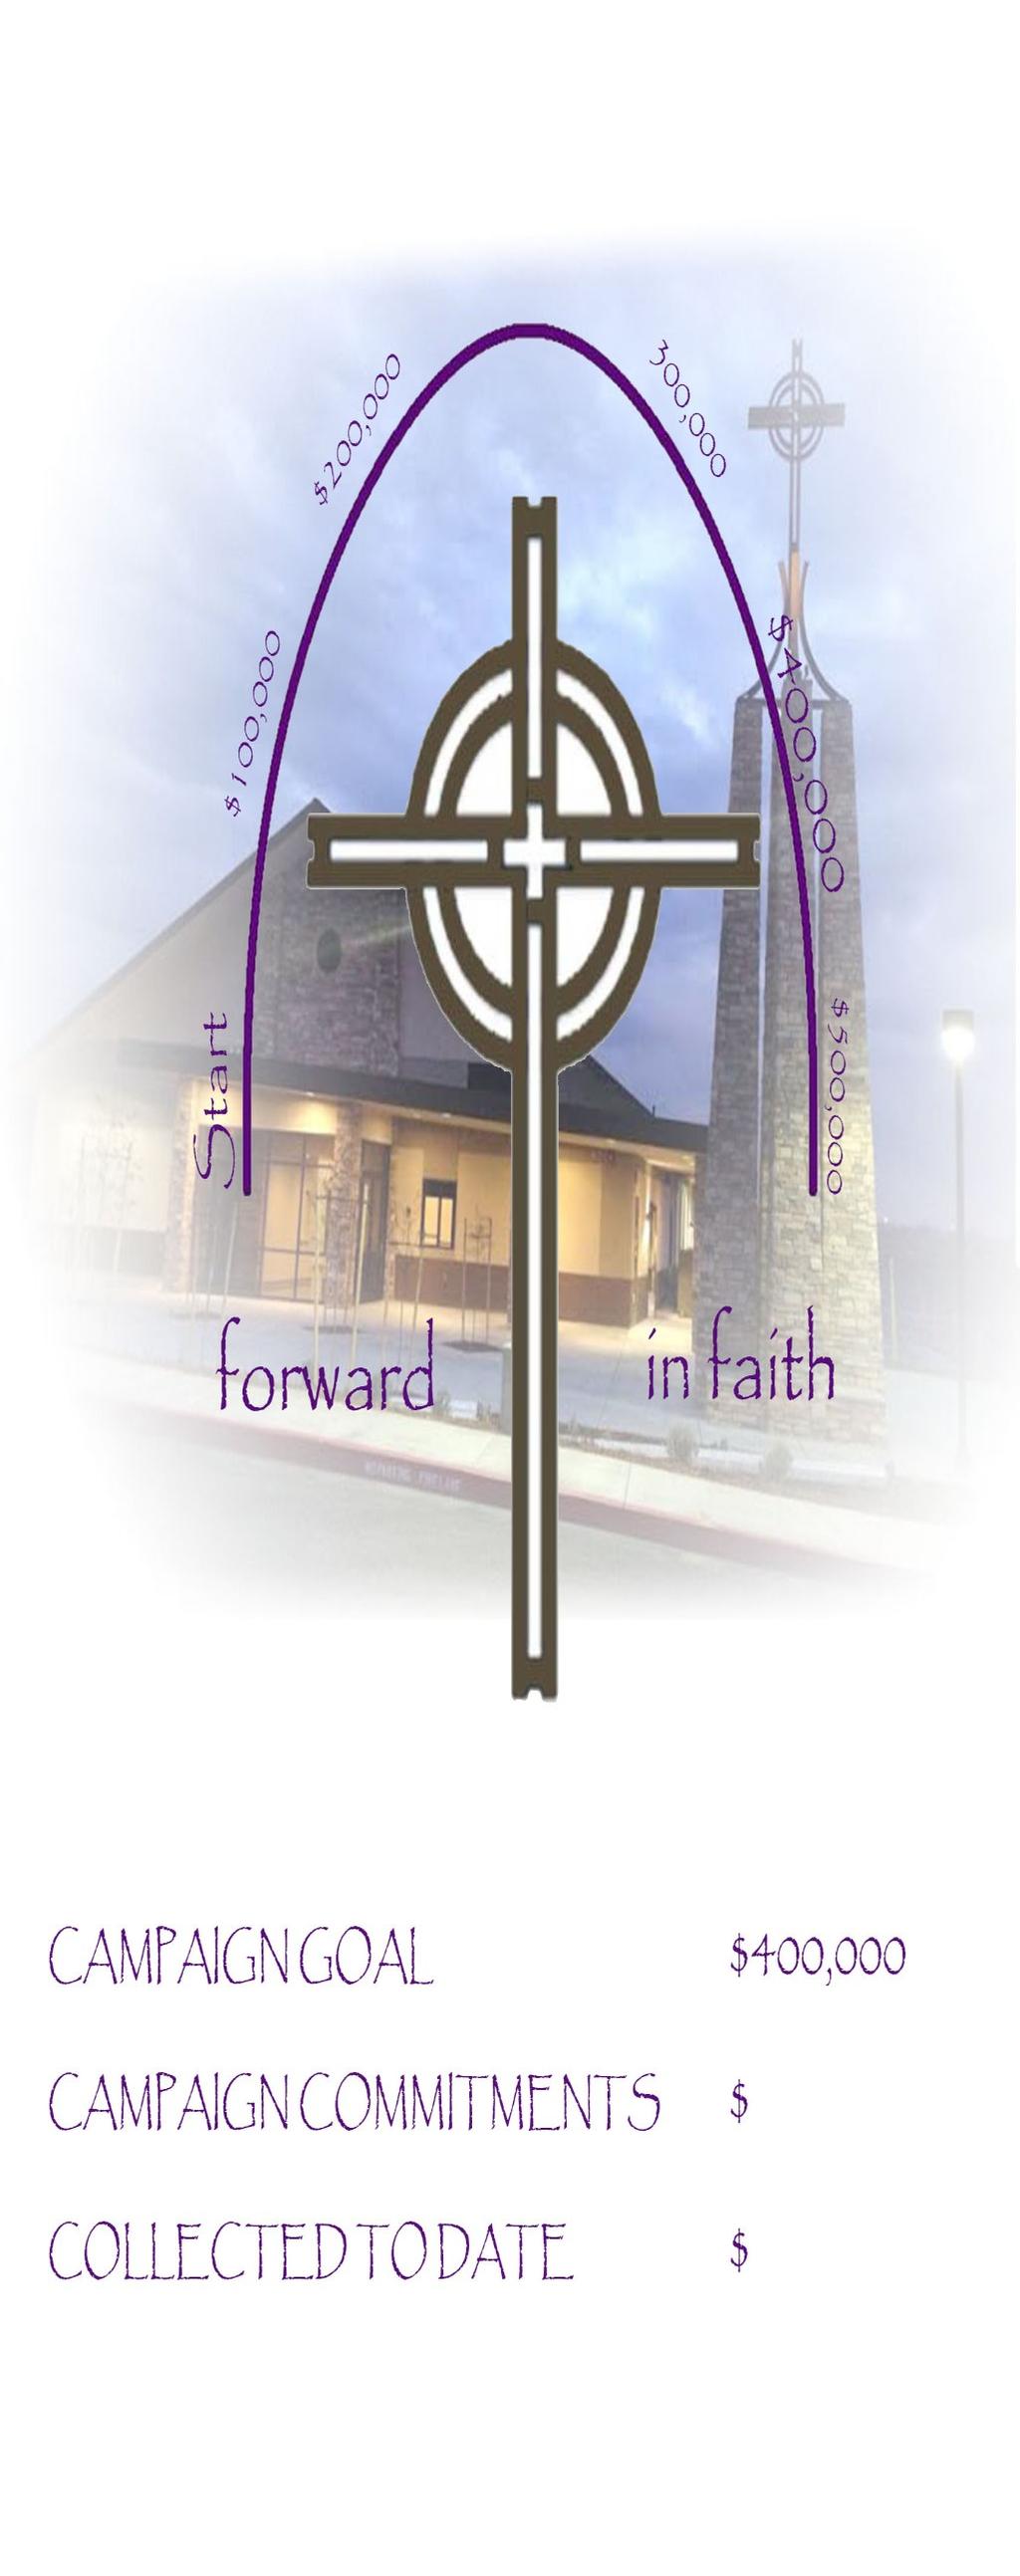 forward in faith Goal $400,000 Amount Committed $435,165 The